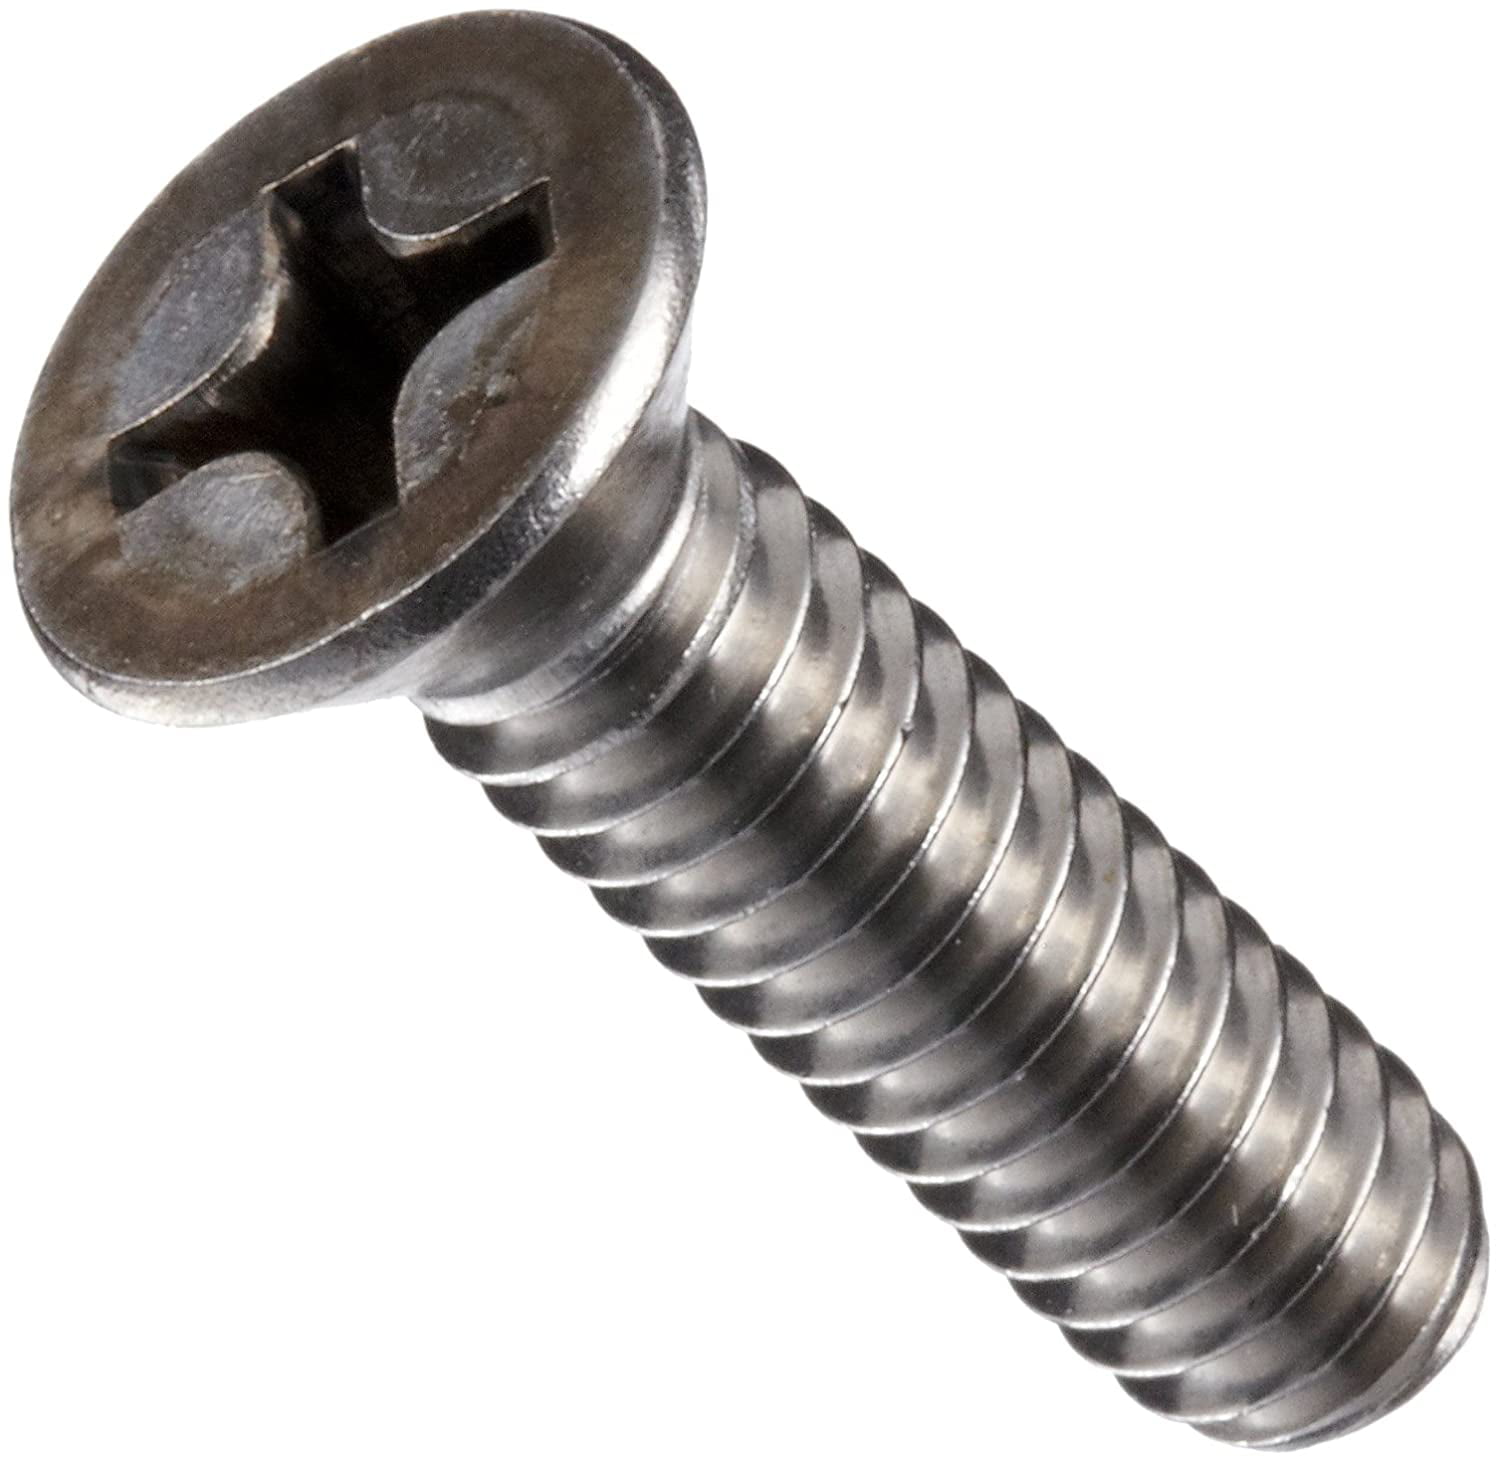 M8-1.25 Threads Plain Finish Pack of 10 Phillips Drive Small Parts Stainless Steel Machine Screw Pan Head 25mm Length 